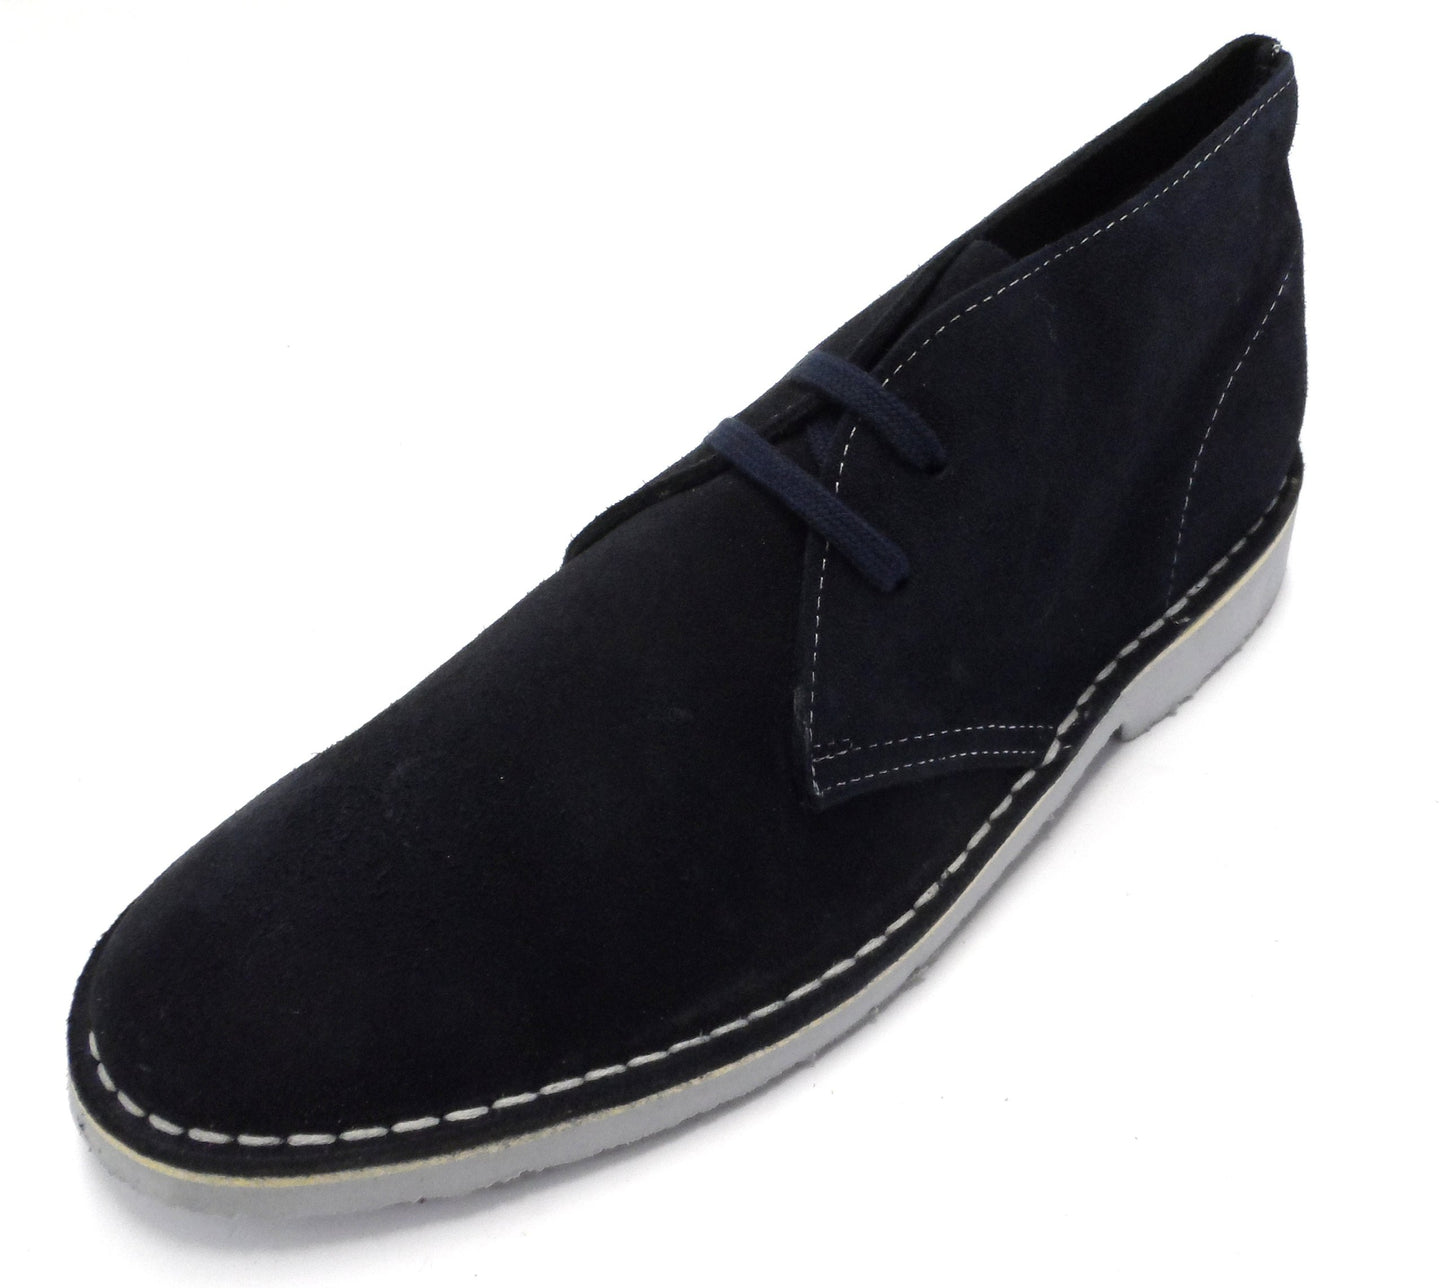 Roamers Navy 2 Eyelet Sharp Toe Retro Mod Style Real Suede Desert Boots